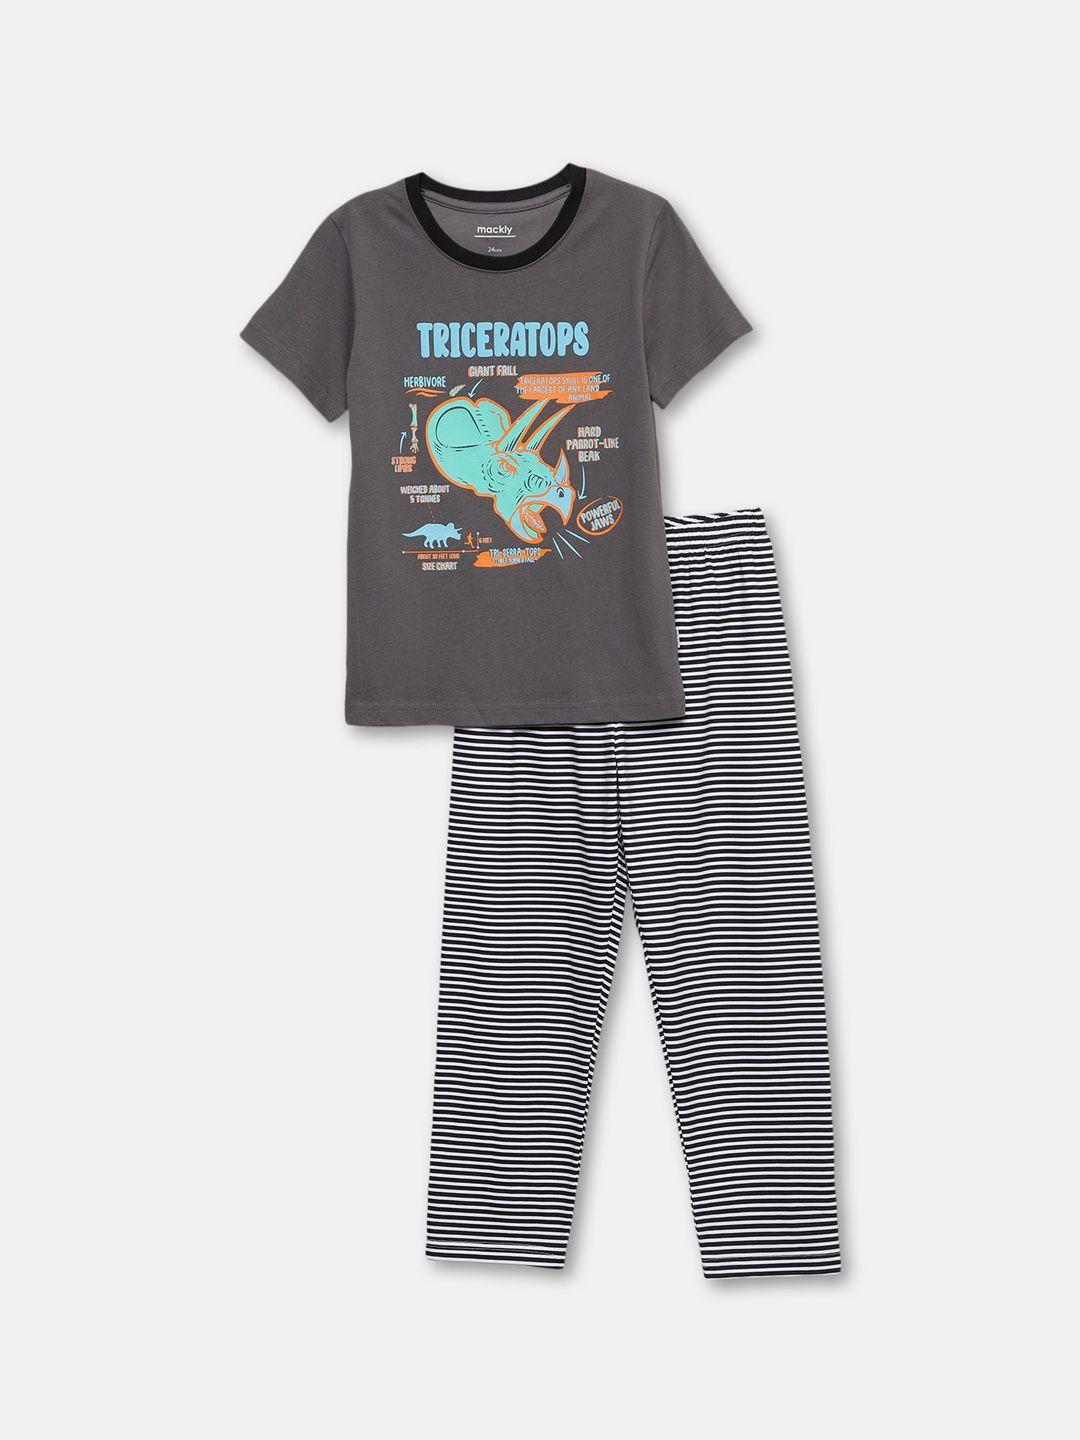 mackly boys graphic printed night suit